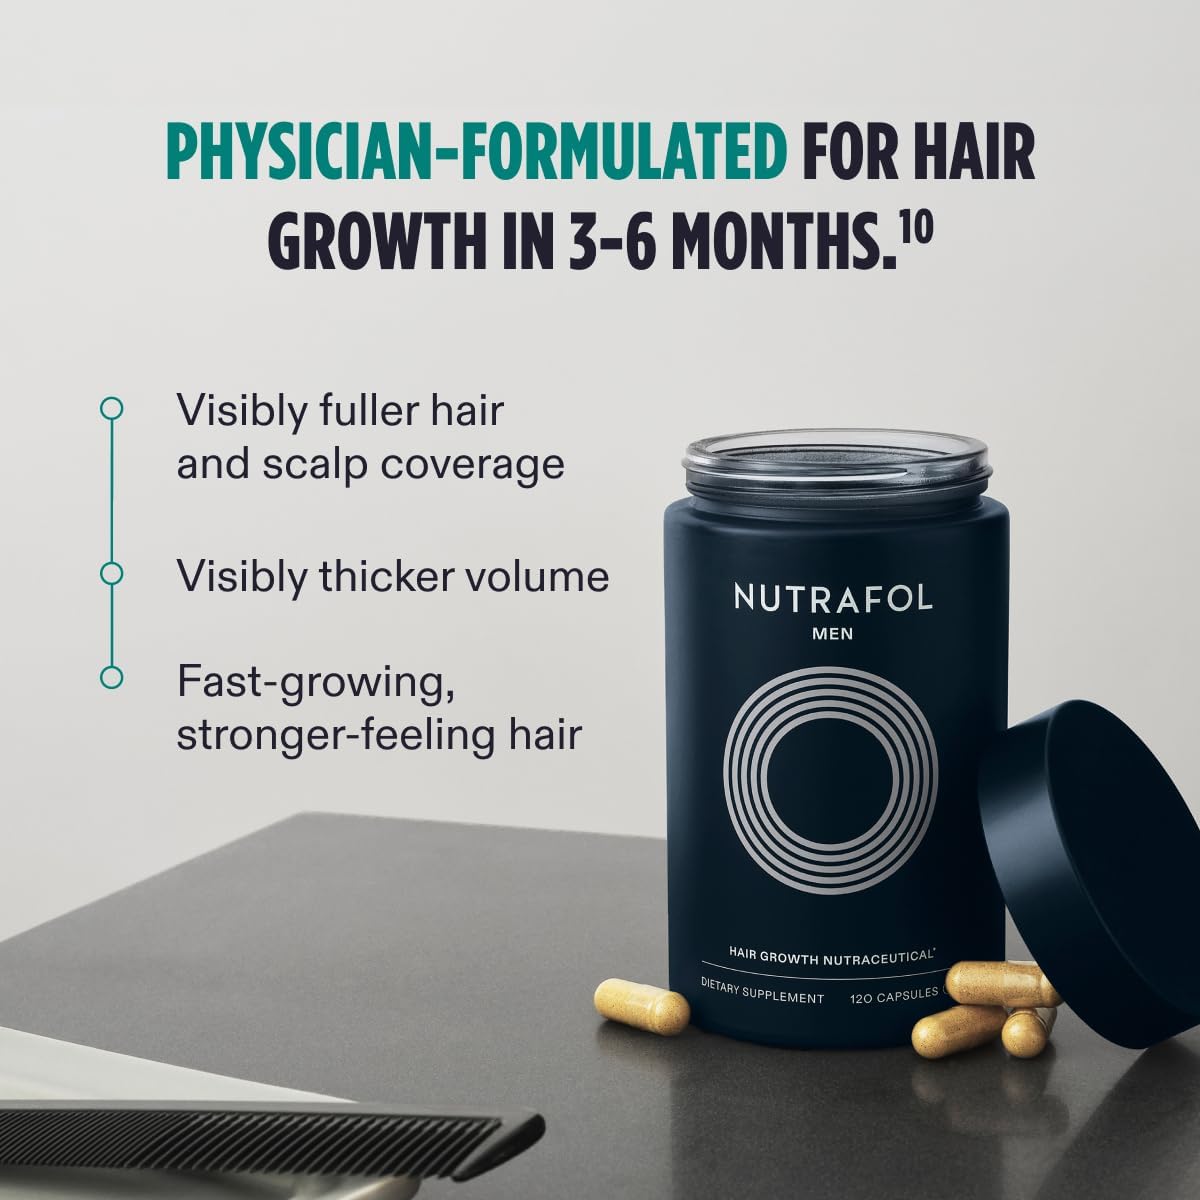 Nutrafol Men's Hair Growth Supplements - 3 Month Supply